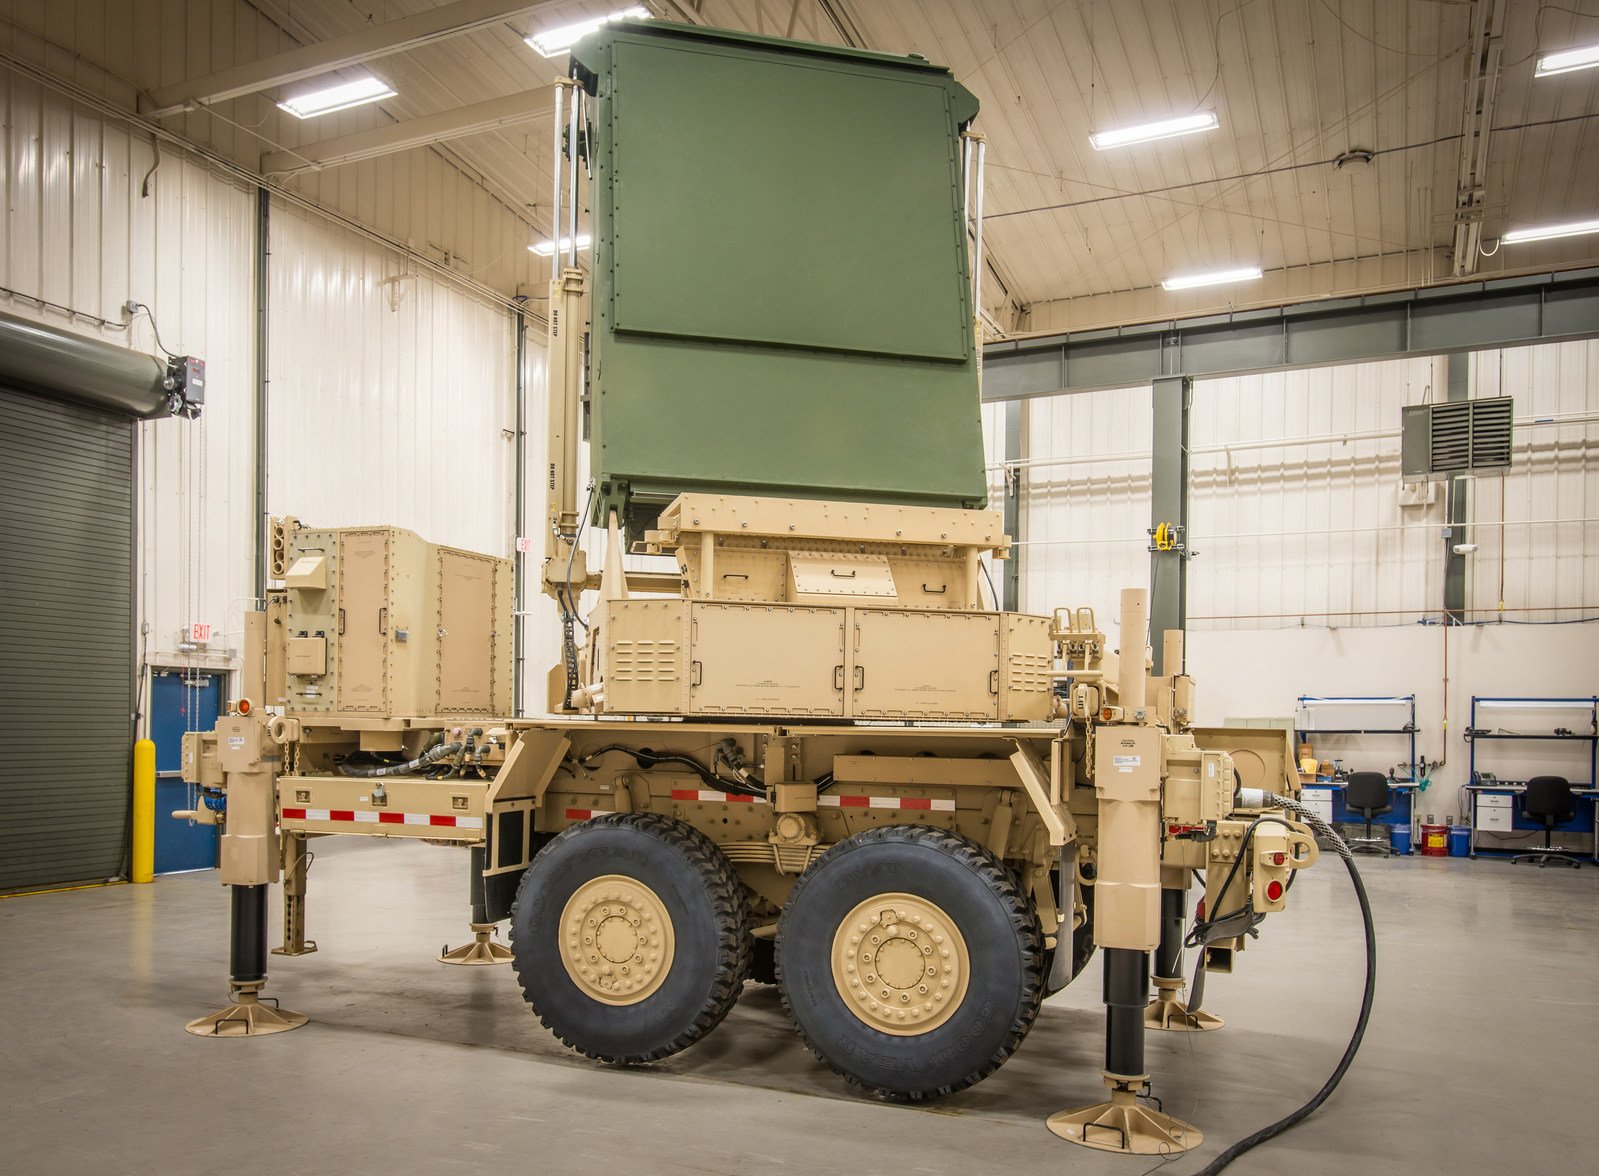 Lockheed Martin’s radar technology demonstrator is being developed to serve as the next generation sensor specifically designed to operate within the U.S. Army Integrated Air & Missile Defense (IAMD) framework.(Image credit: Lockheed Martin)